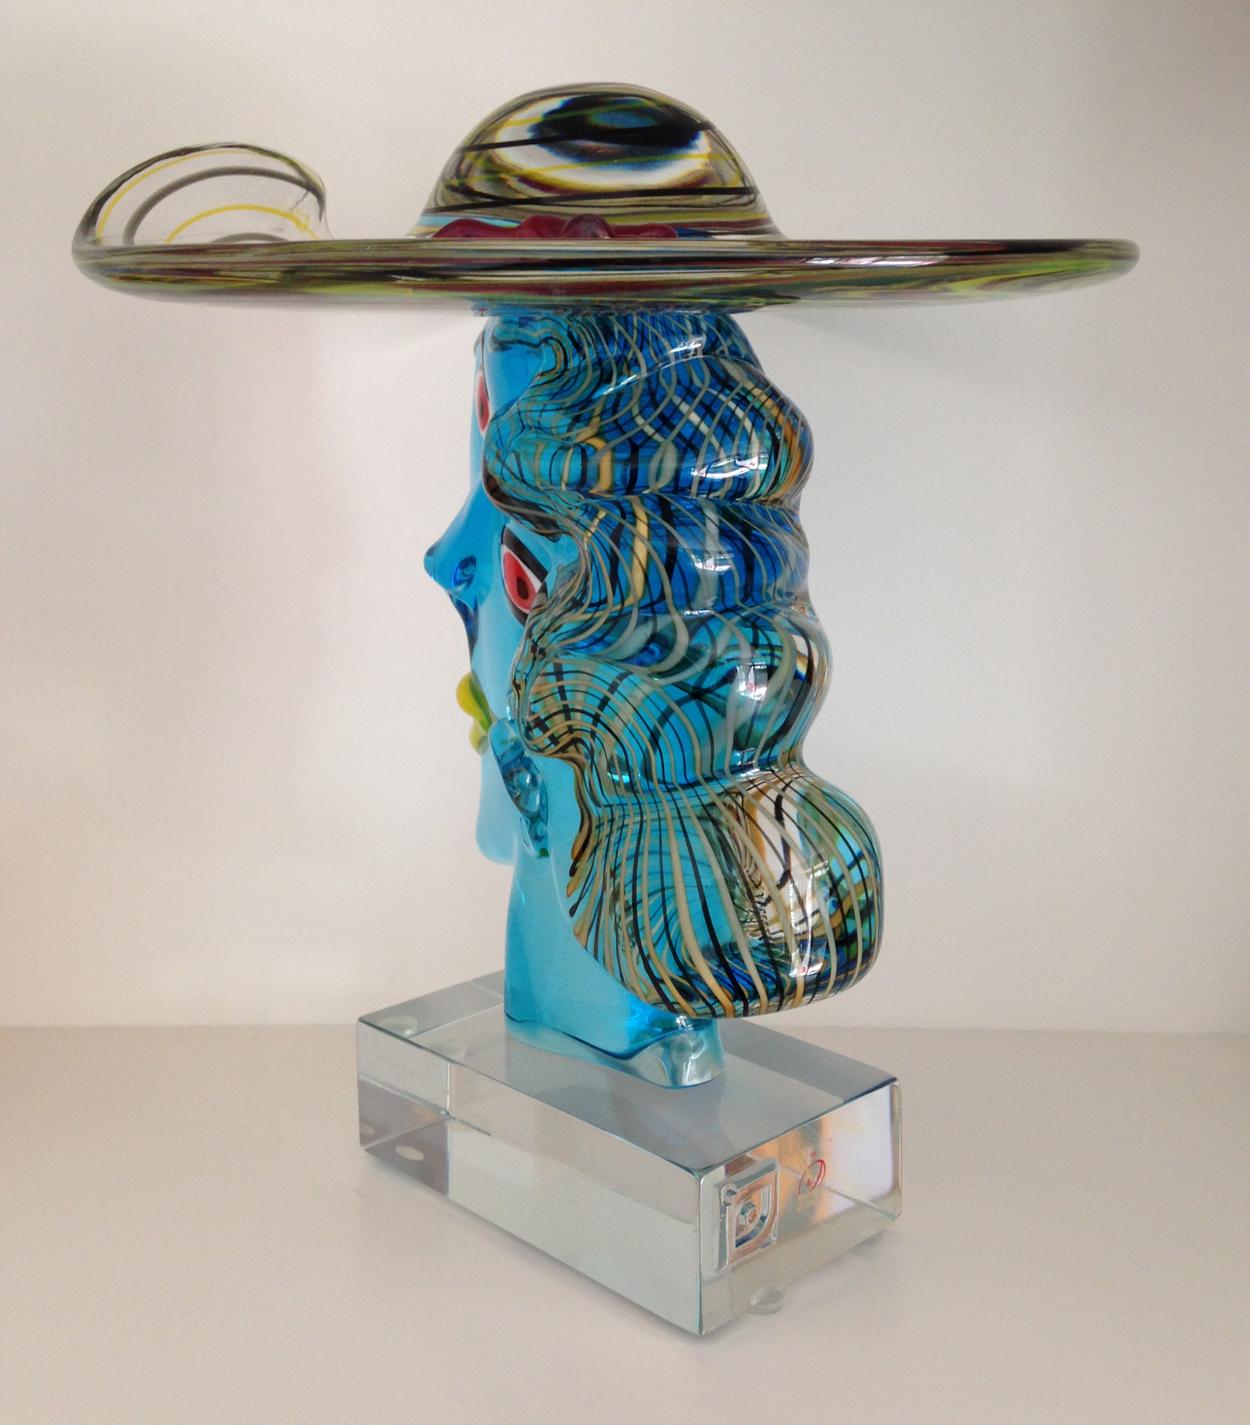 Murano glass Picasso inspired sculpture - ??'Omaggio a Picasso', created by Glass Master Walter Furlan. In vivid shades of blue, red, yellow, black and clear glass.

Walter Furlan was born near Venice in 1931. At an early age he went to work in